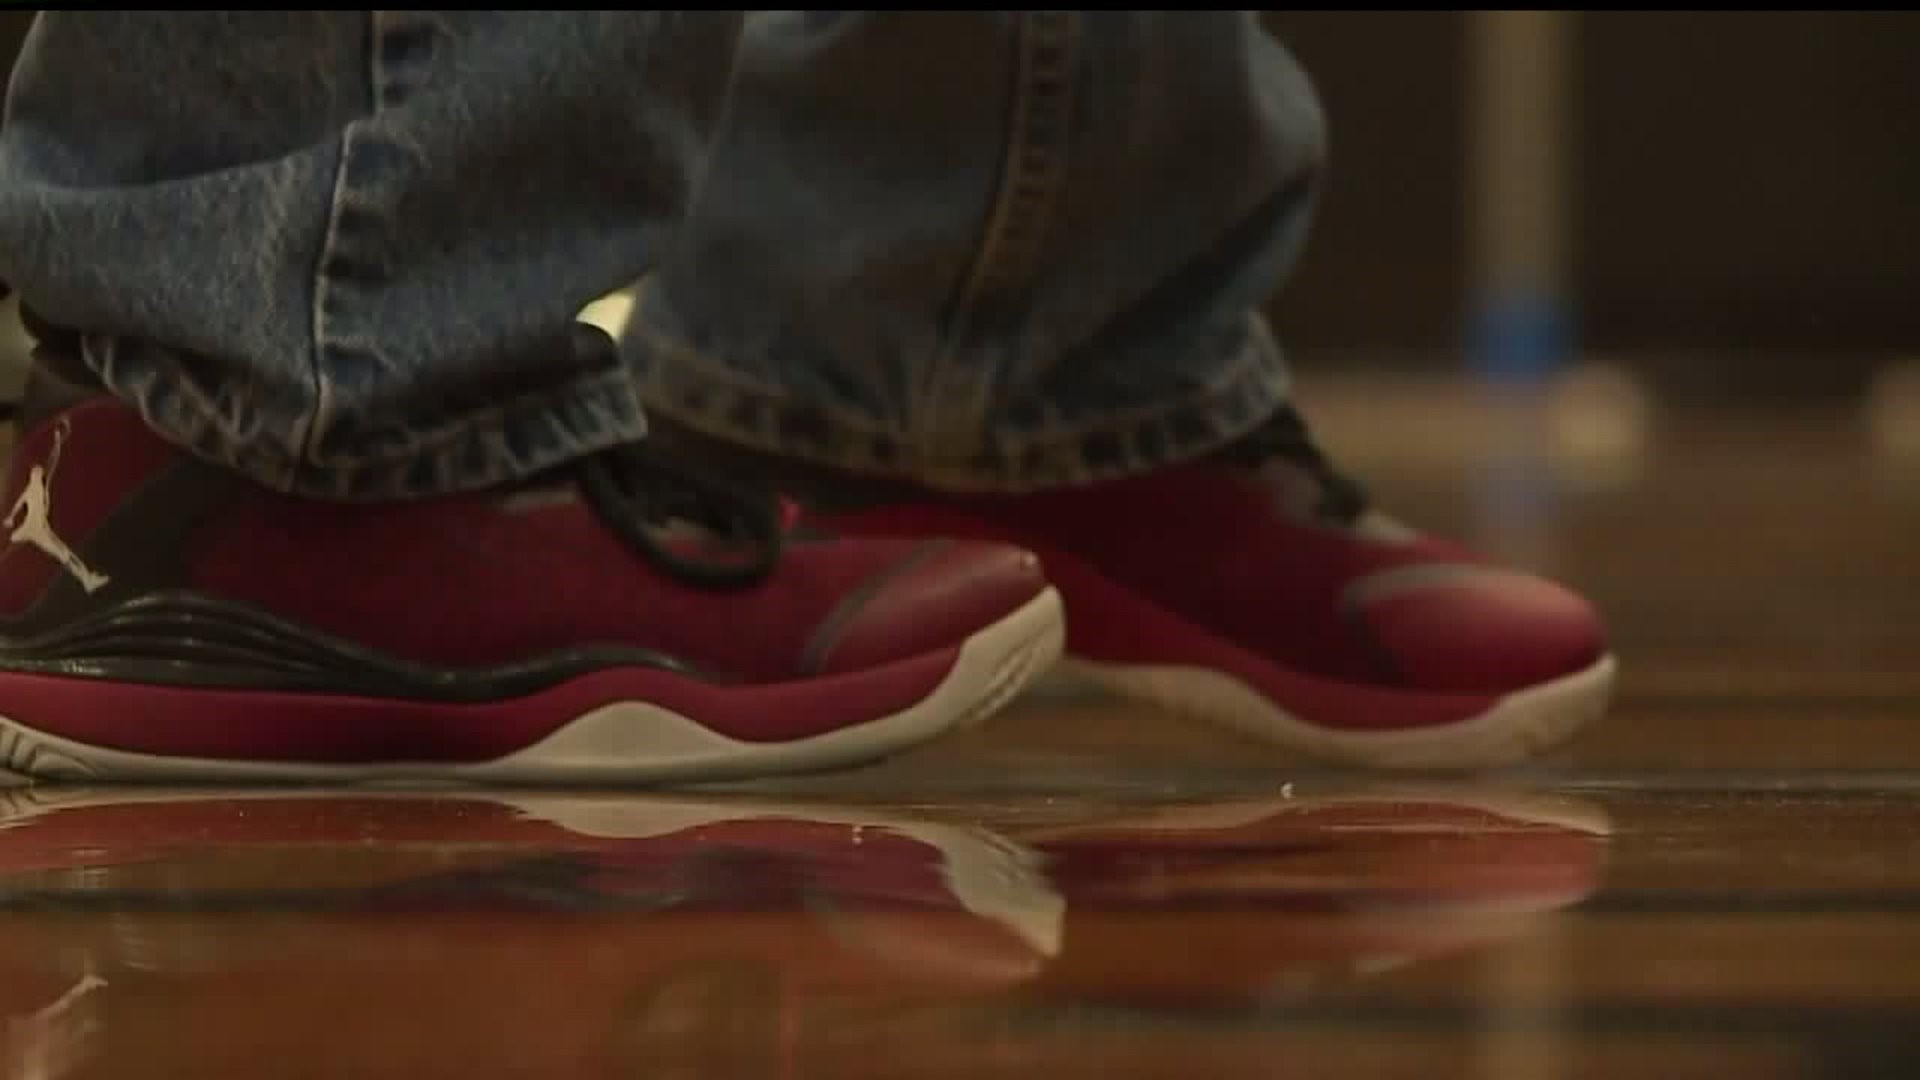 Central Dauphin East athletes surprise 9-year-old basketball lover with brand new sneakers